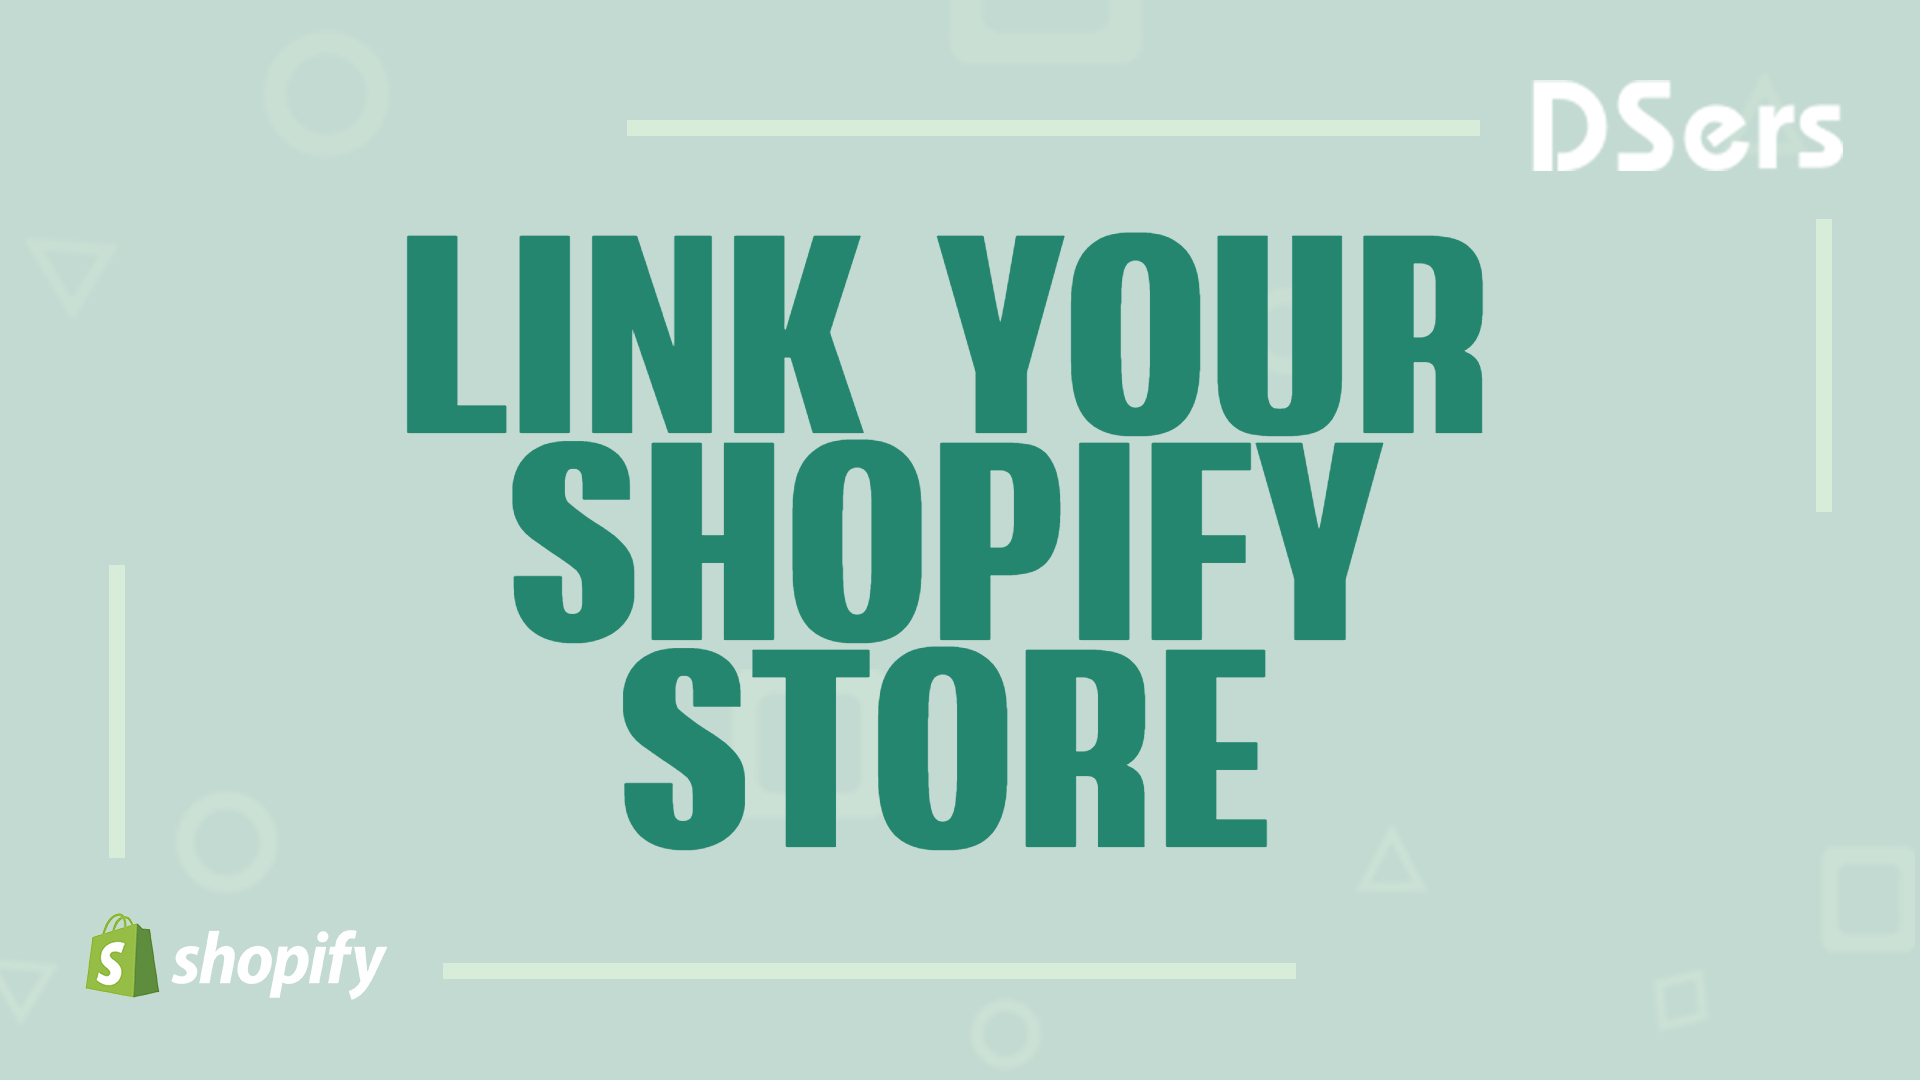 Link your Shopify store